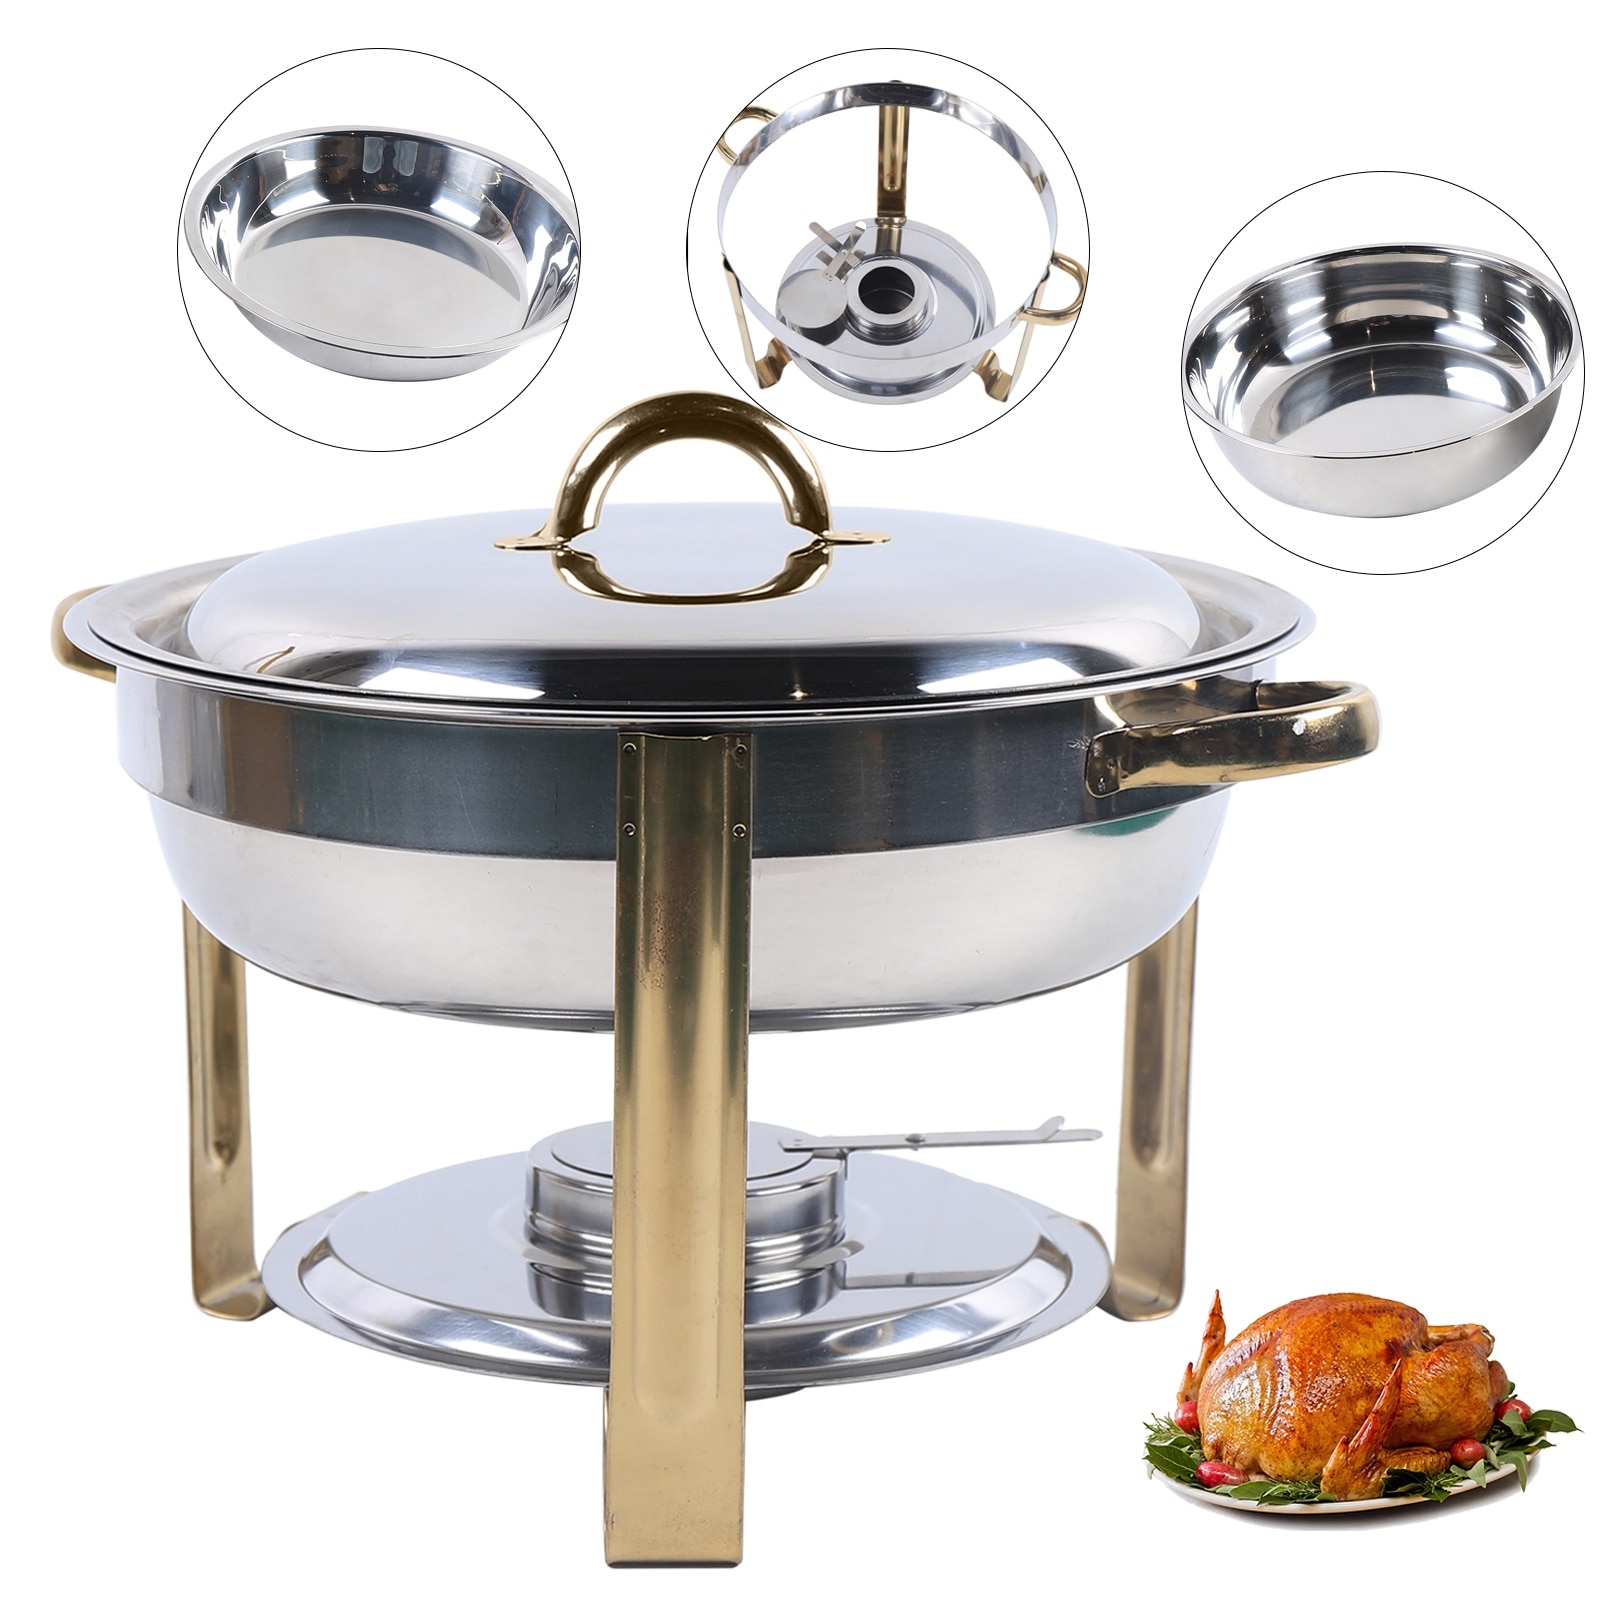 https://ak1.ostkcdn.com/images/products/is/images/direct/8b138fecb4776abe4612a3bcc59215b20c9f0243/Stainless-Steel-Round-Chafing-Dish-4-Quart-Serving-Buffet-Warmer.jpg